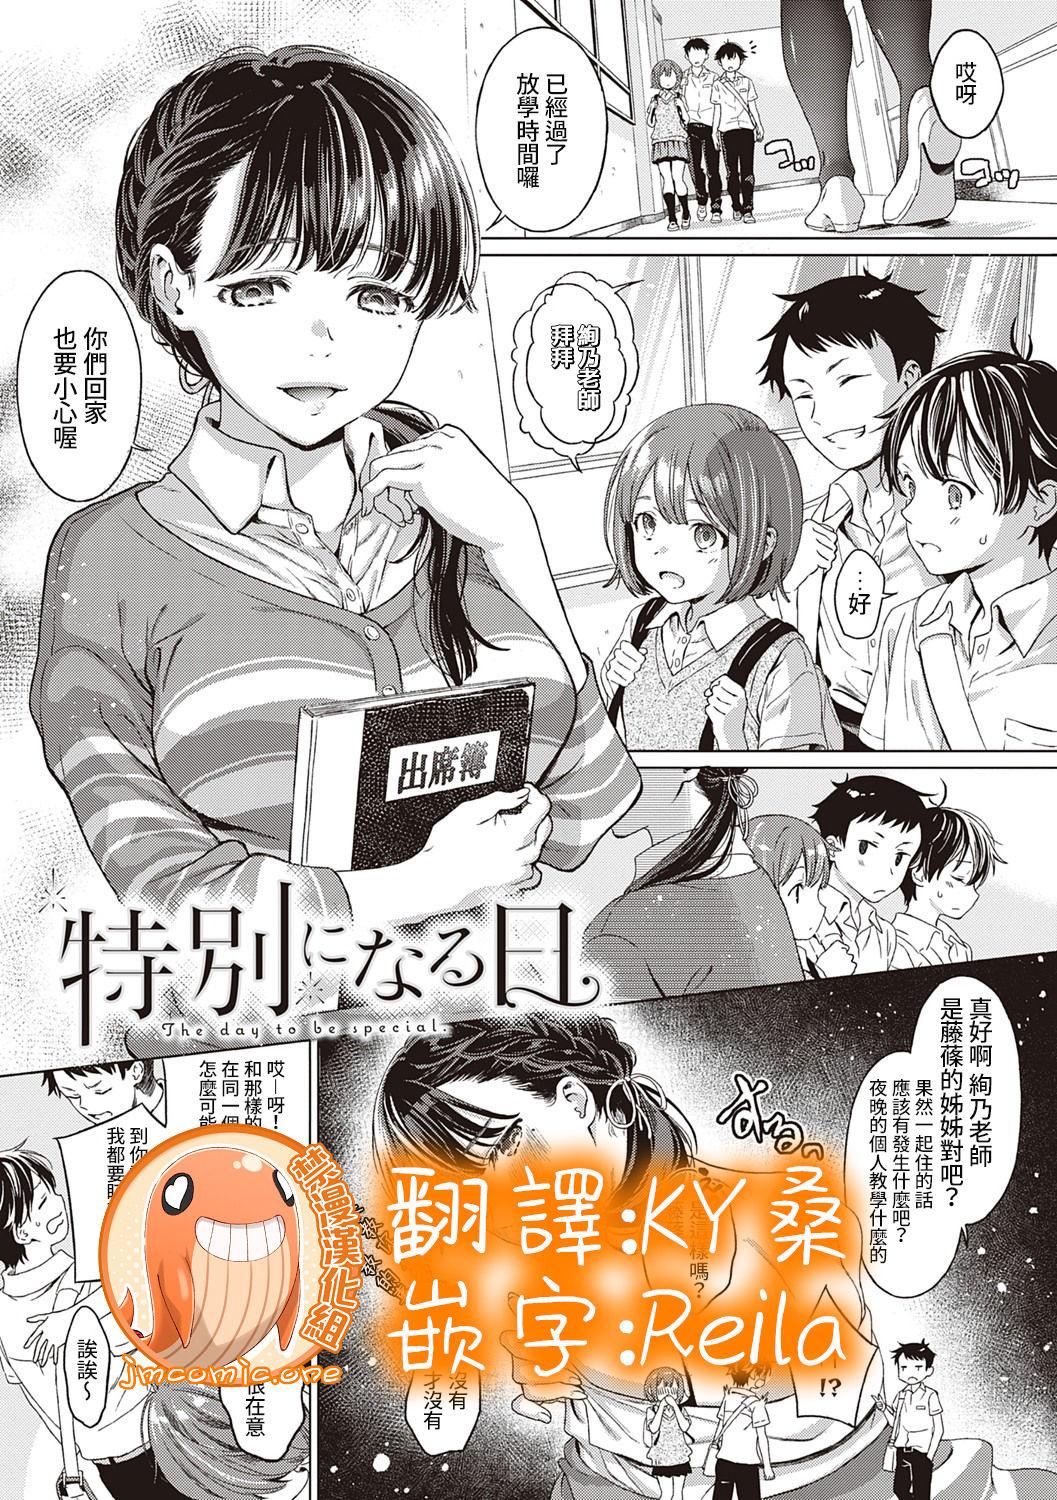 Stepmother Tokubetsu ni Naru Hi - The day to be special. Stepsister - Page 1